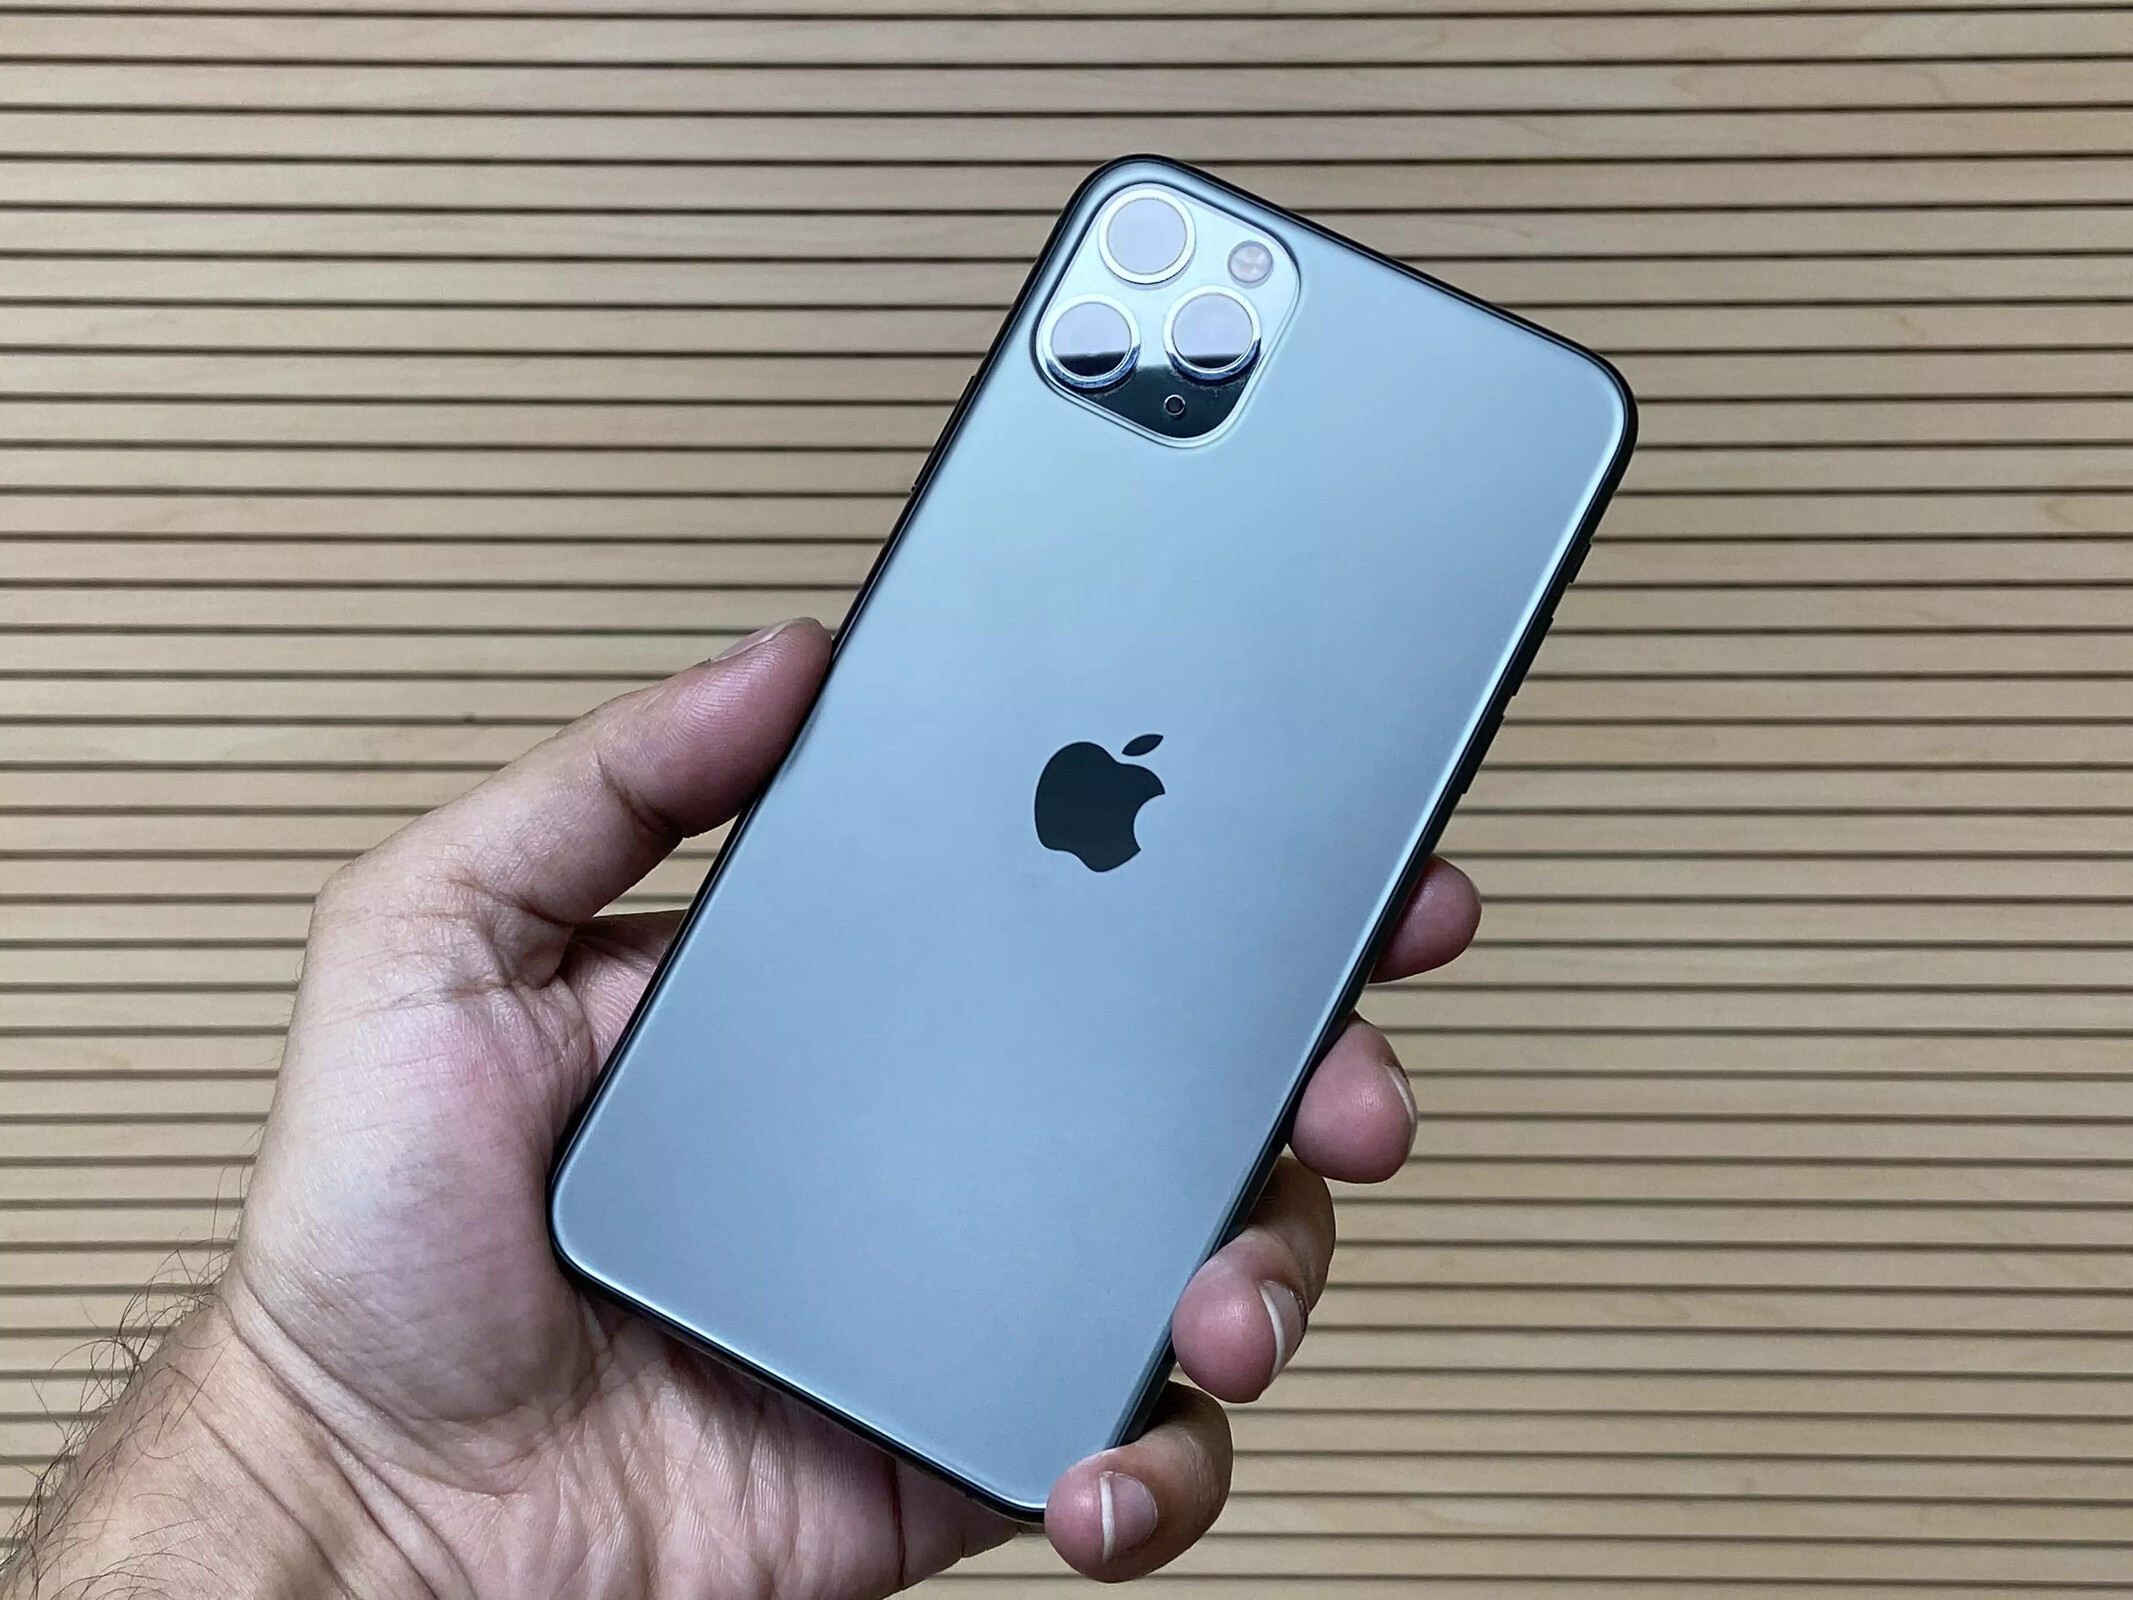 Some iPhone 11 Pro series units may be suffering from a